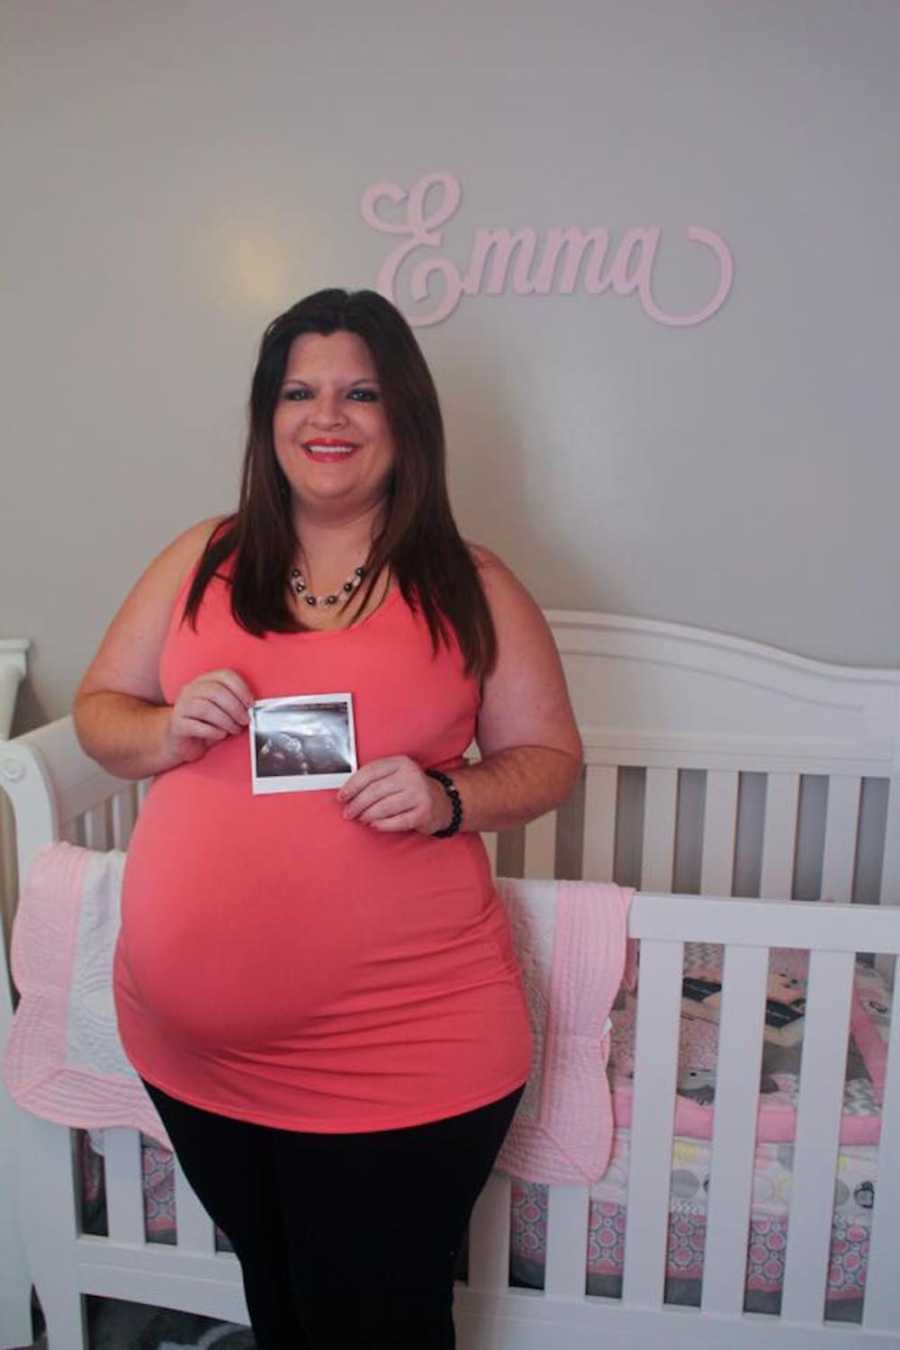 Pregnant woman smiling in front of crib holding ultrasound picture in front of her